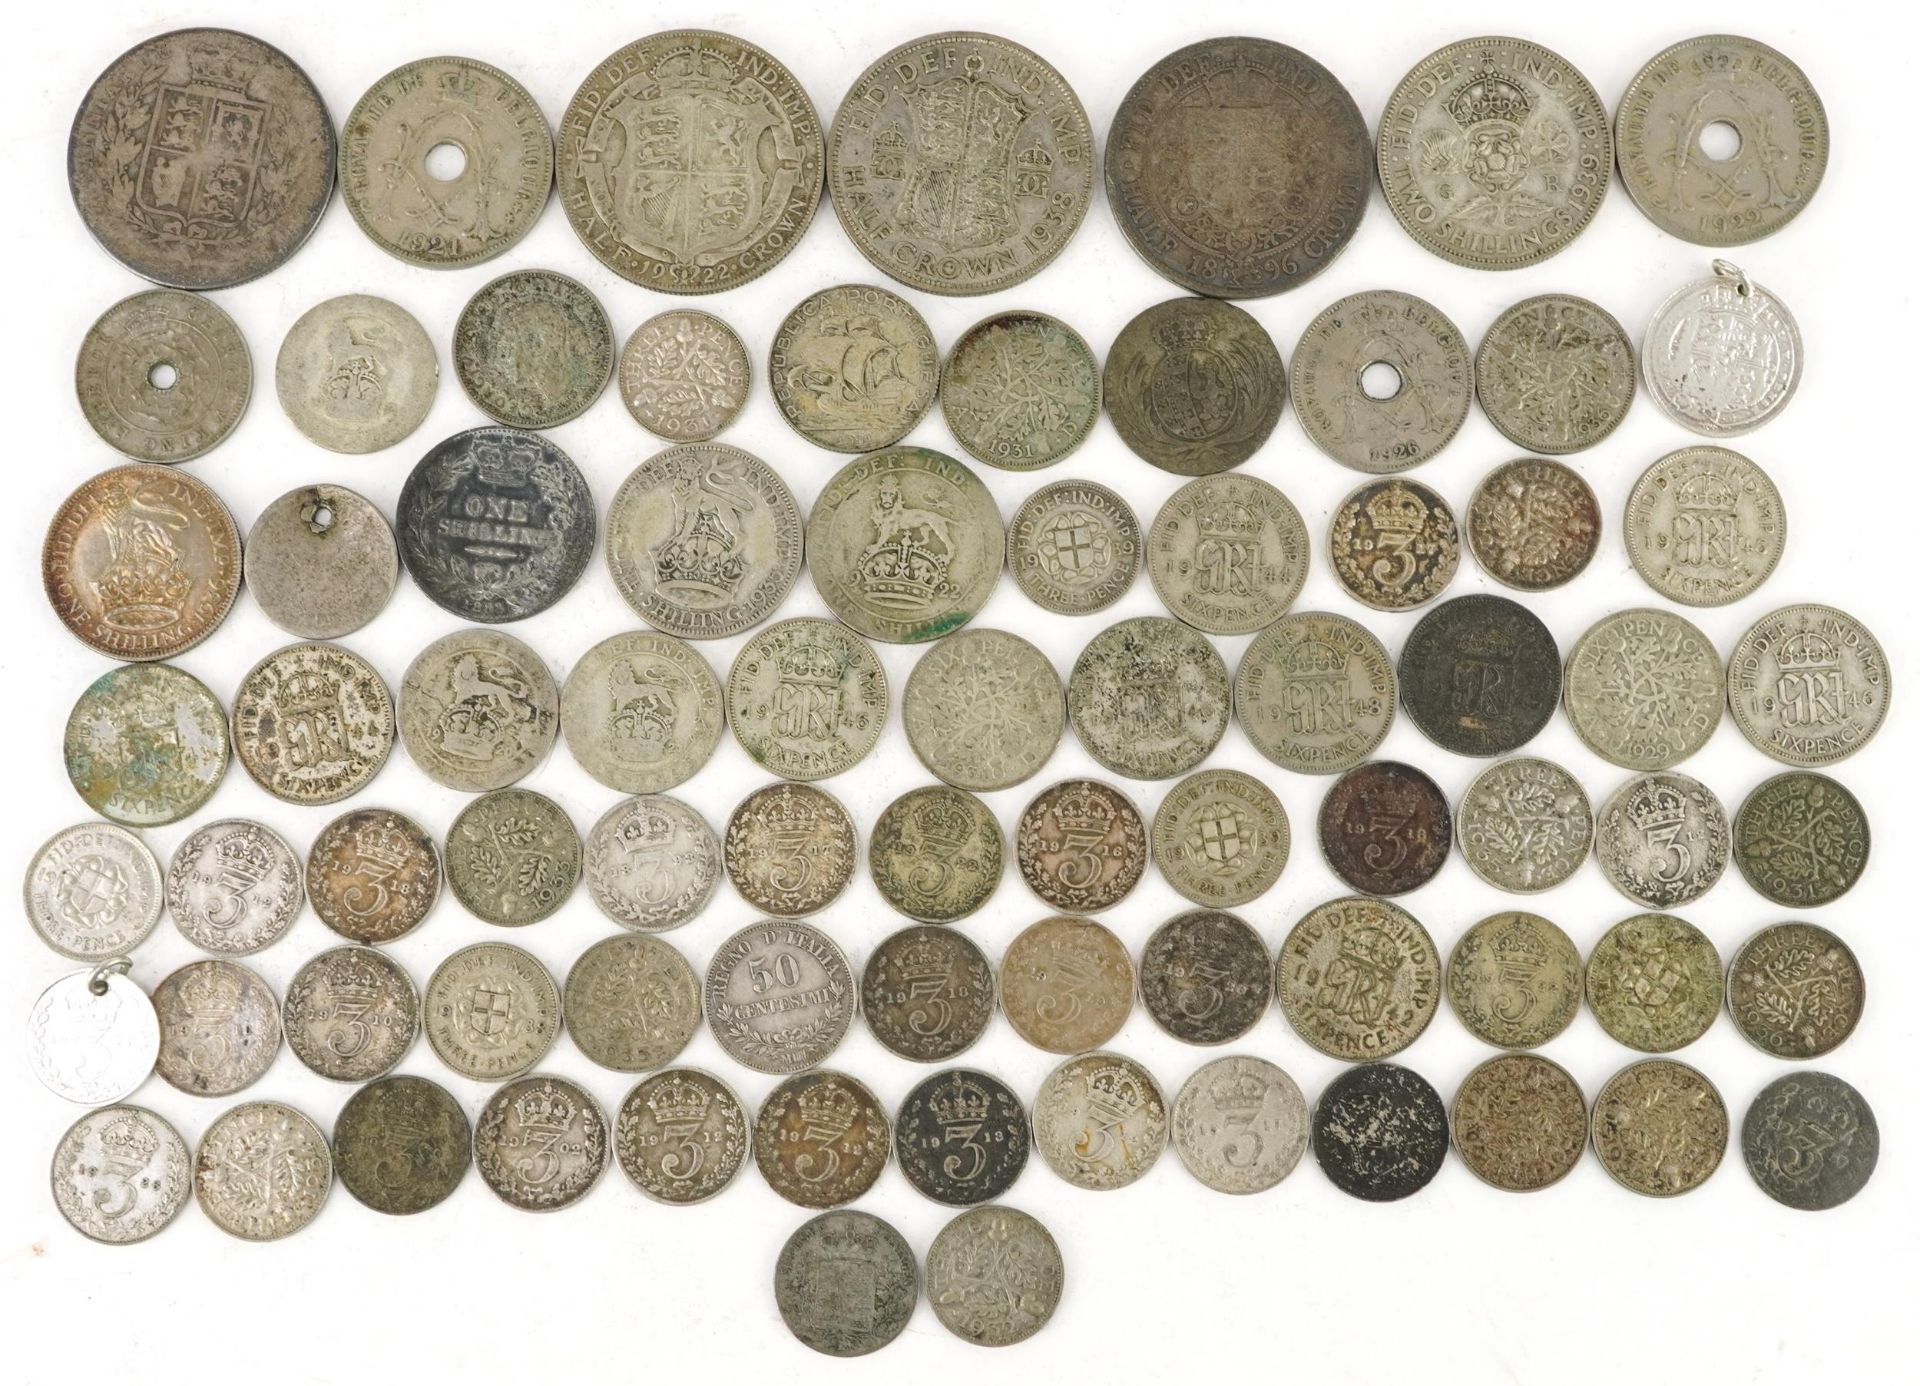 Victorian and later British coinage including half crowns and threepenny bits : For further